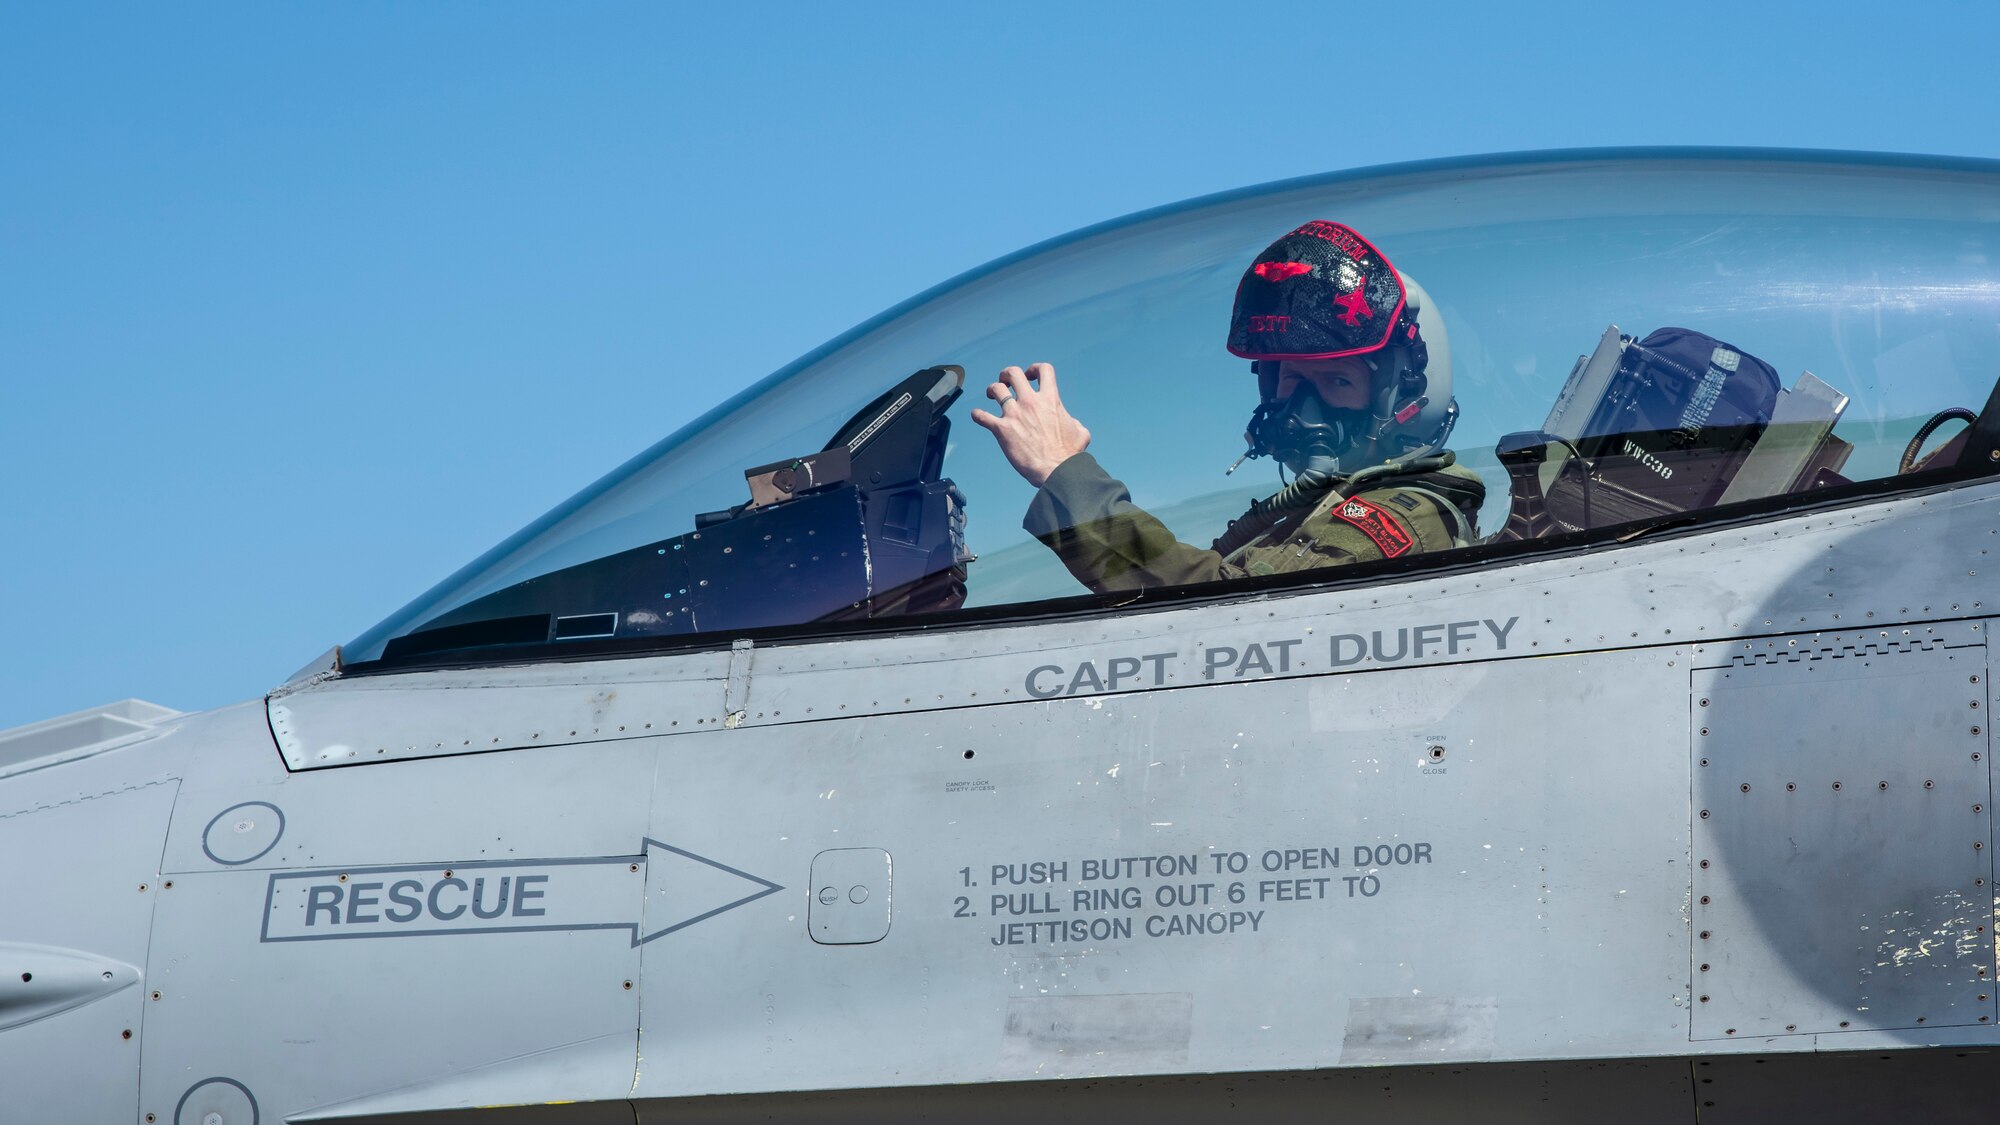 U.S. Air Force Capt. Reese Black, a 13th Fighter Squadron F-16 Fighting Falcon pilot and chief of mobility, throws up the “panther paw” at Misawa Air Base, Japan, March 30, 2020. Airmen with the 13th FS and 13th Aircraft Maintenance Unit display the “panther paw” hand sign as homage to Eldridge, the 13th Tactical Fighter Squadron’s pet panther, during the Vietnam War, now represented as the official mascot of the 13th FS. (U.S. Air Force photo by Airman 1st Class China M. Shock)